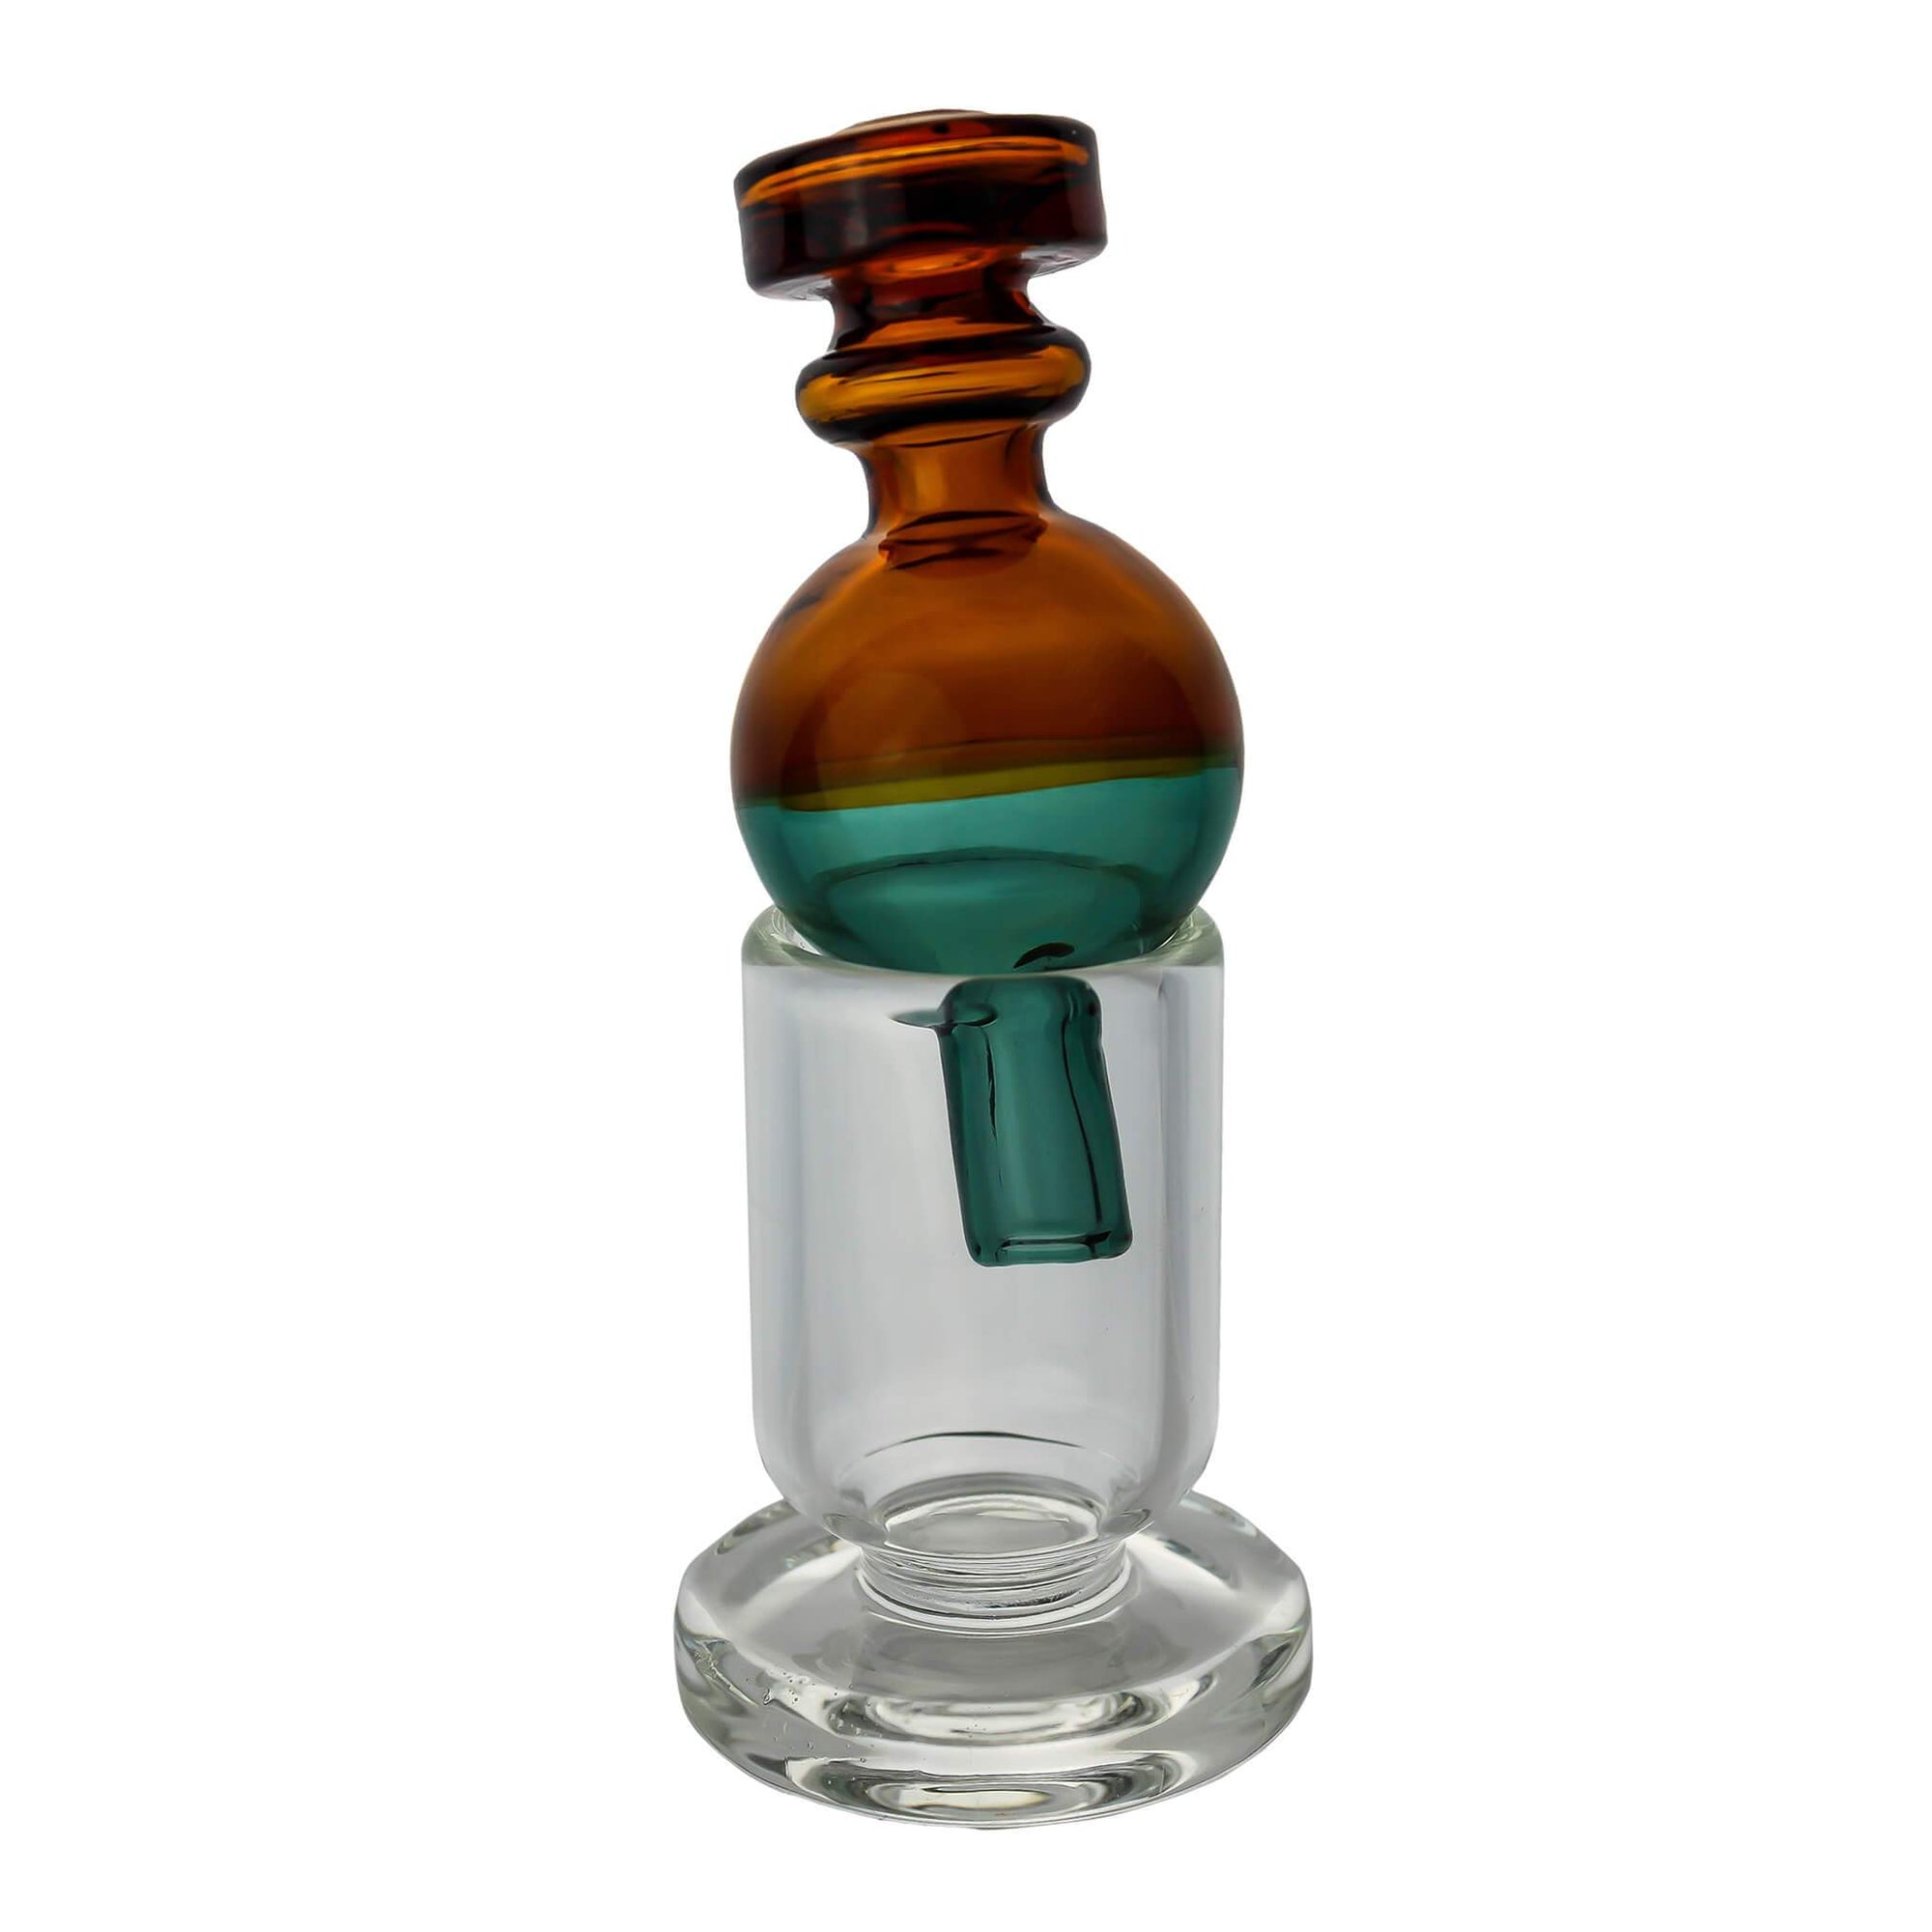 Carb Cap Holder (Terp Pearl Holder) | In Carb Cap Holder Alternate View | Dabbing Warehouse